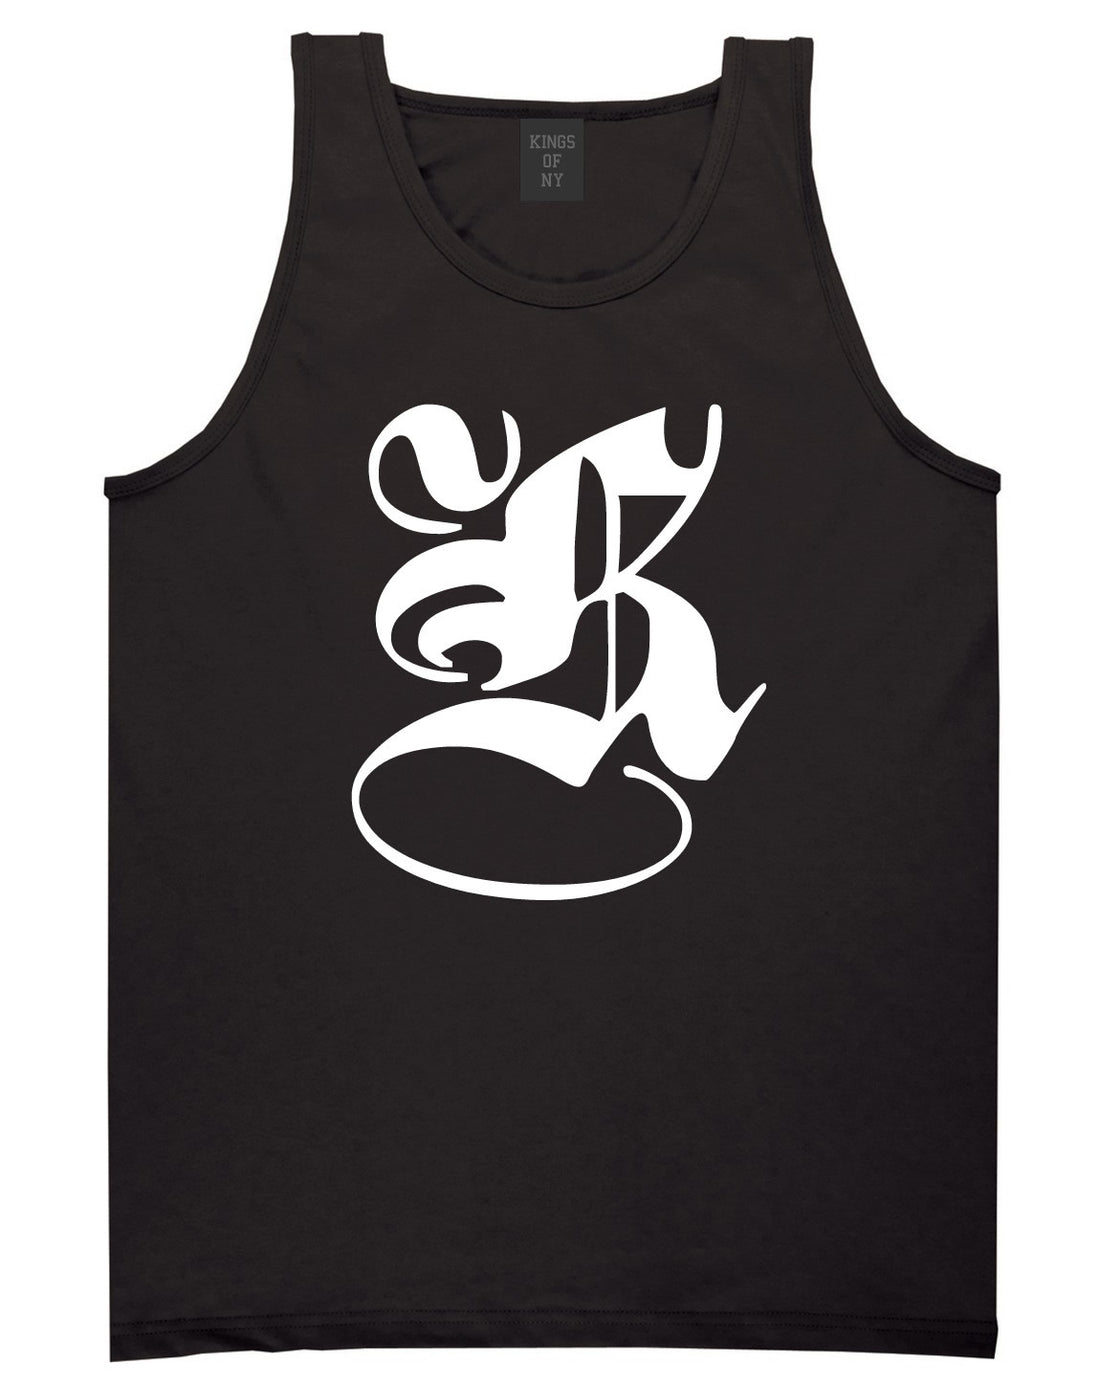 Kings Of NY K Gothic Style Tank Top in Black